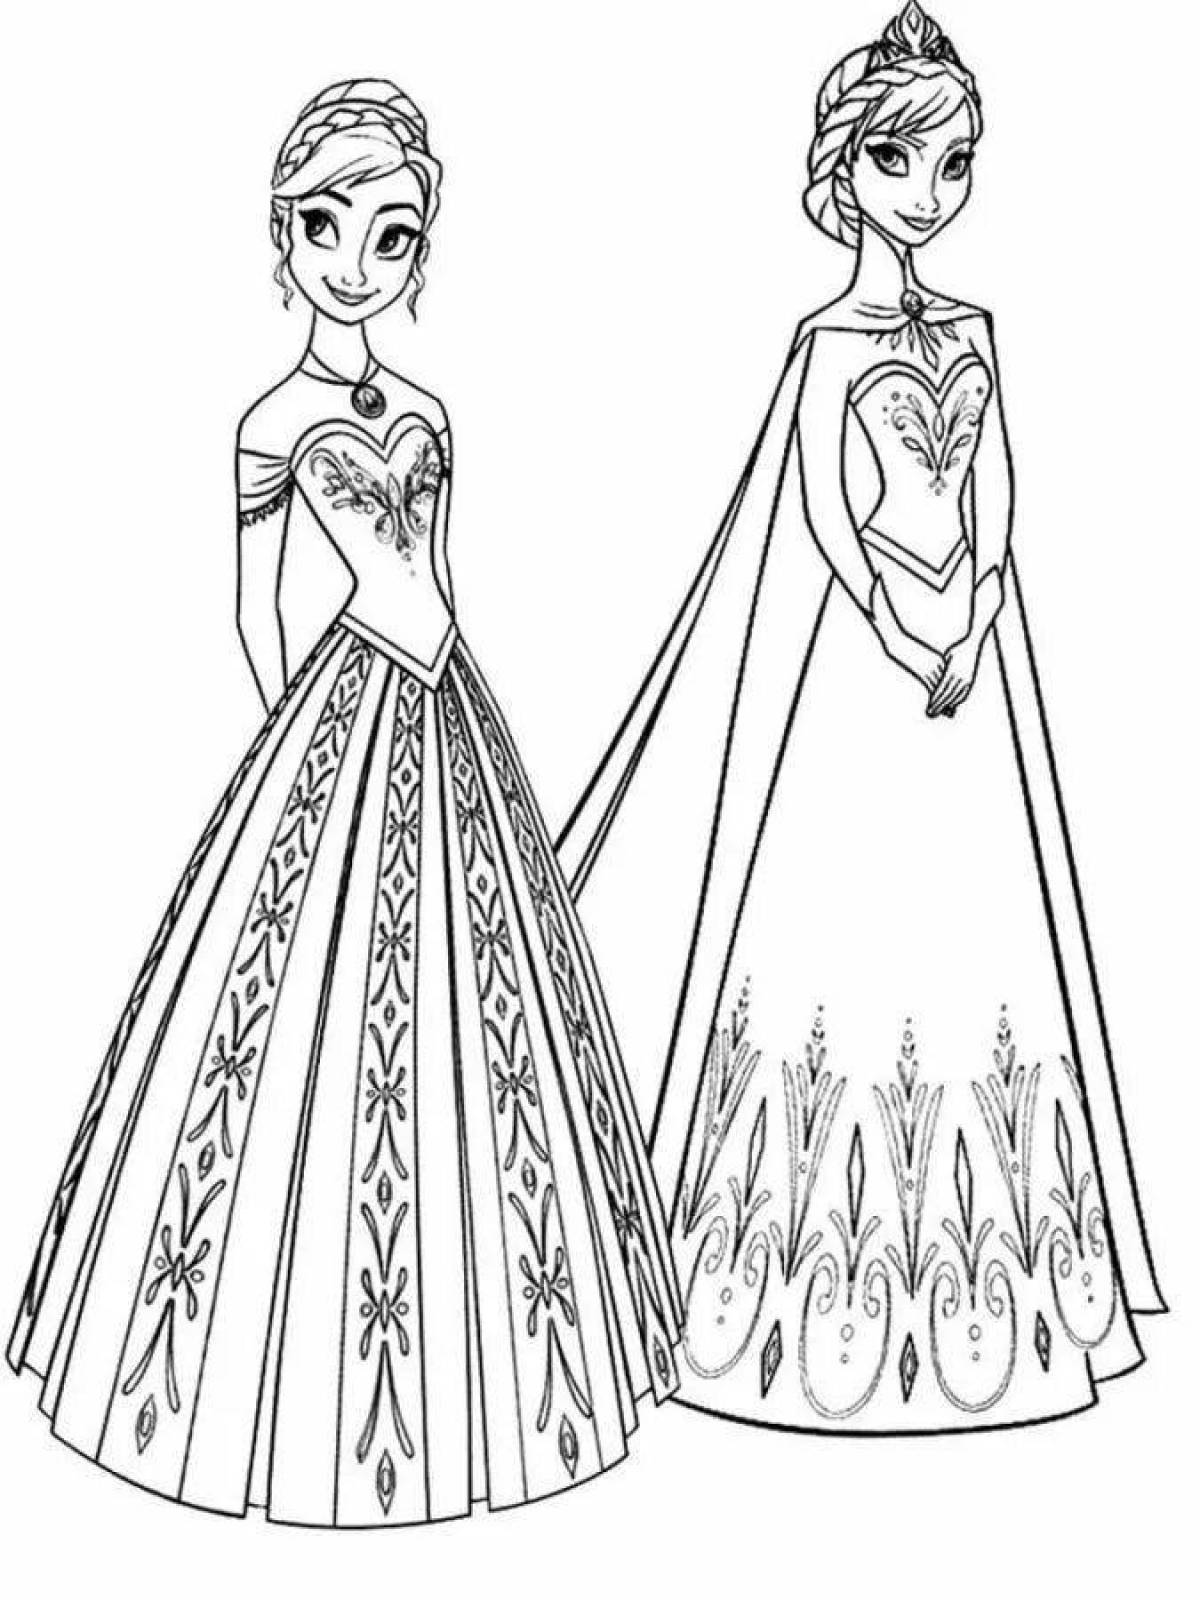 Delightful coloring elsa and anna